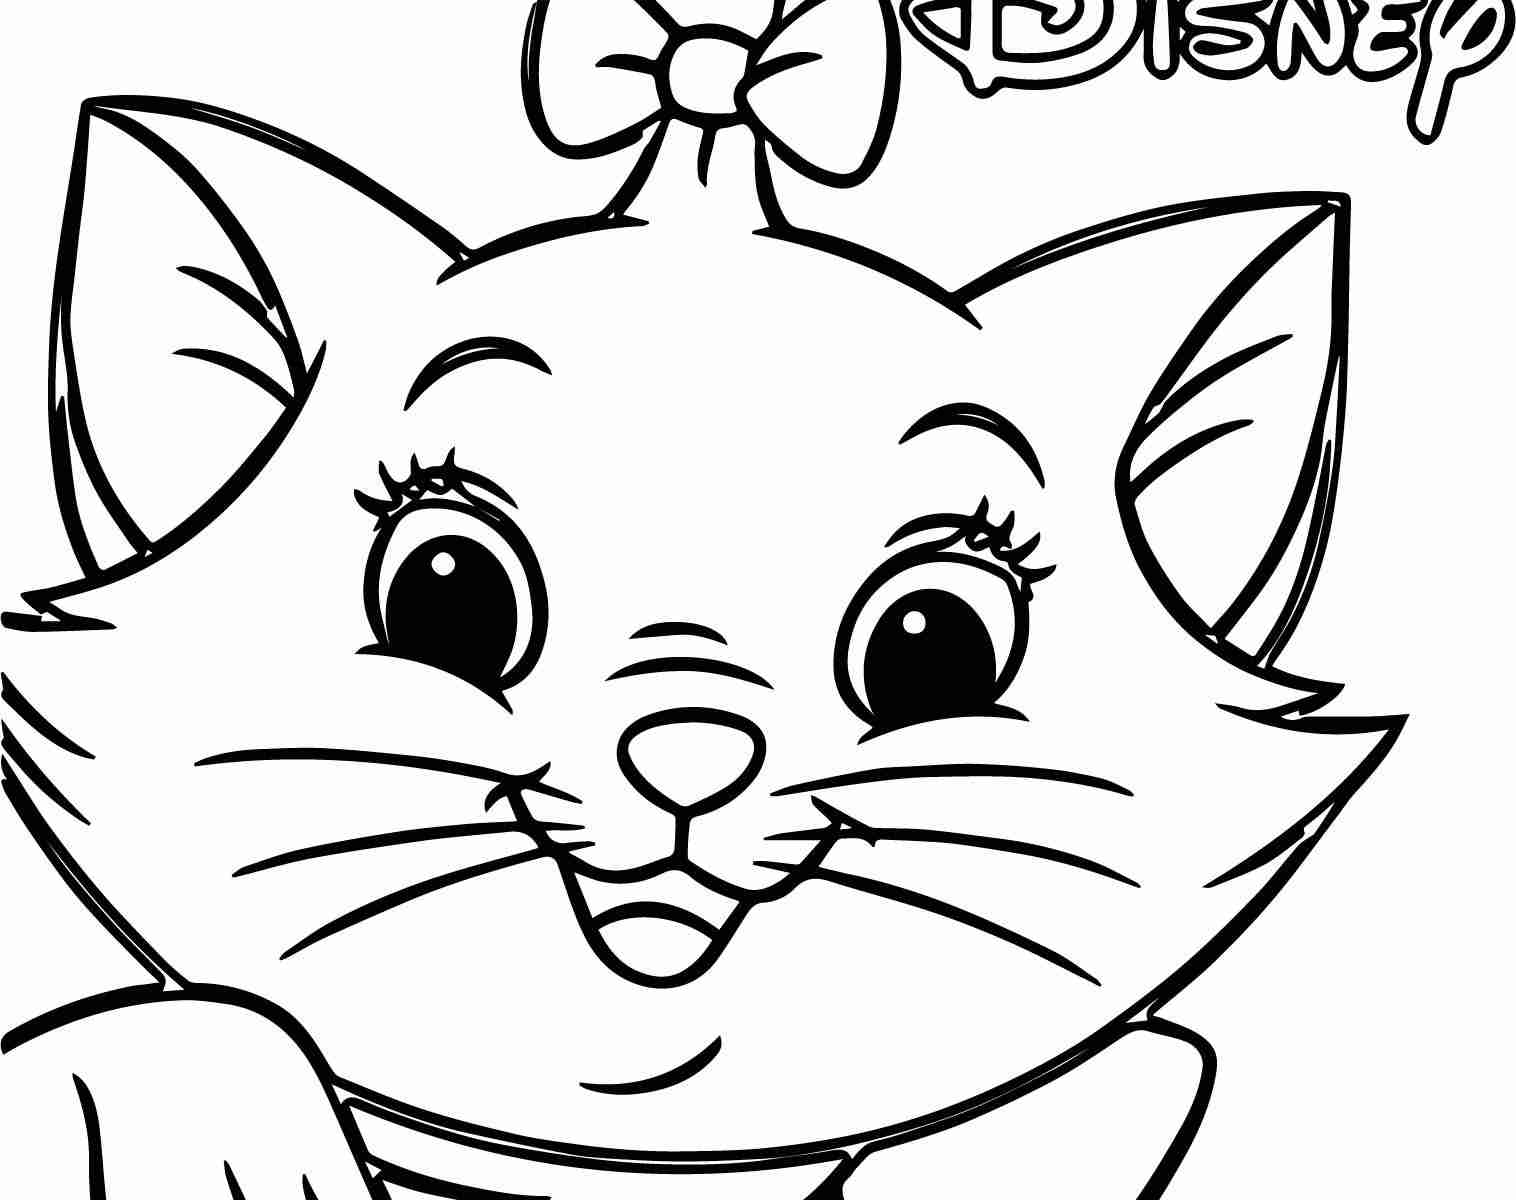 marie-aristocats-coloring-pages-at-getcolorings-free-printable-colorings-pages-to-print